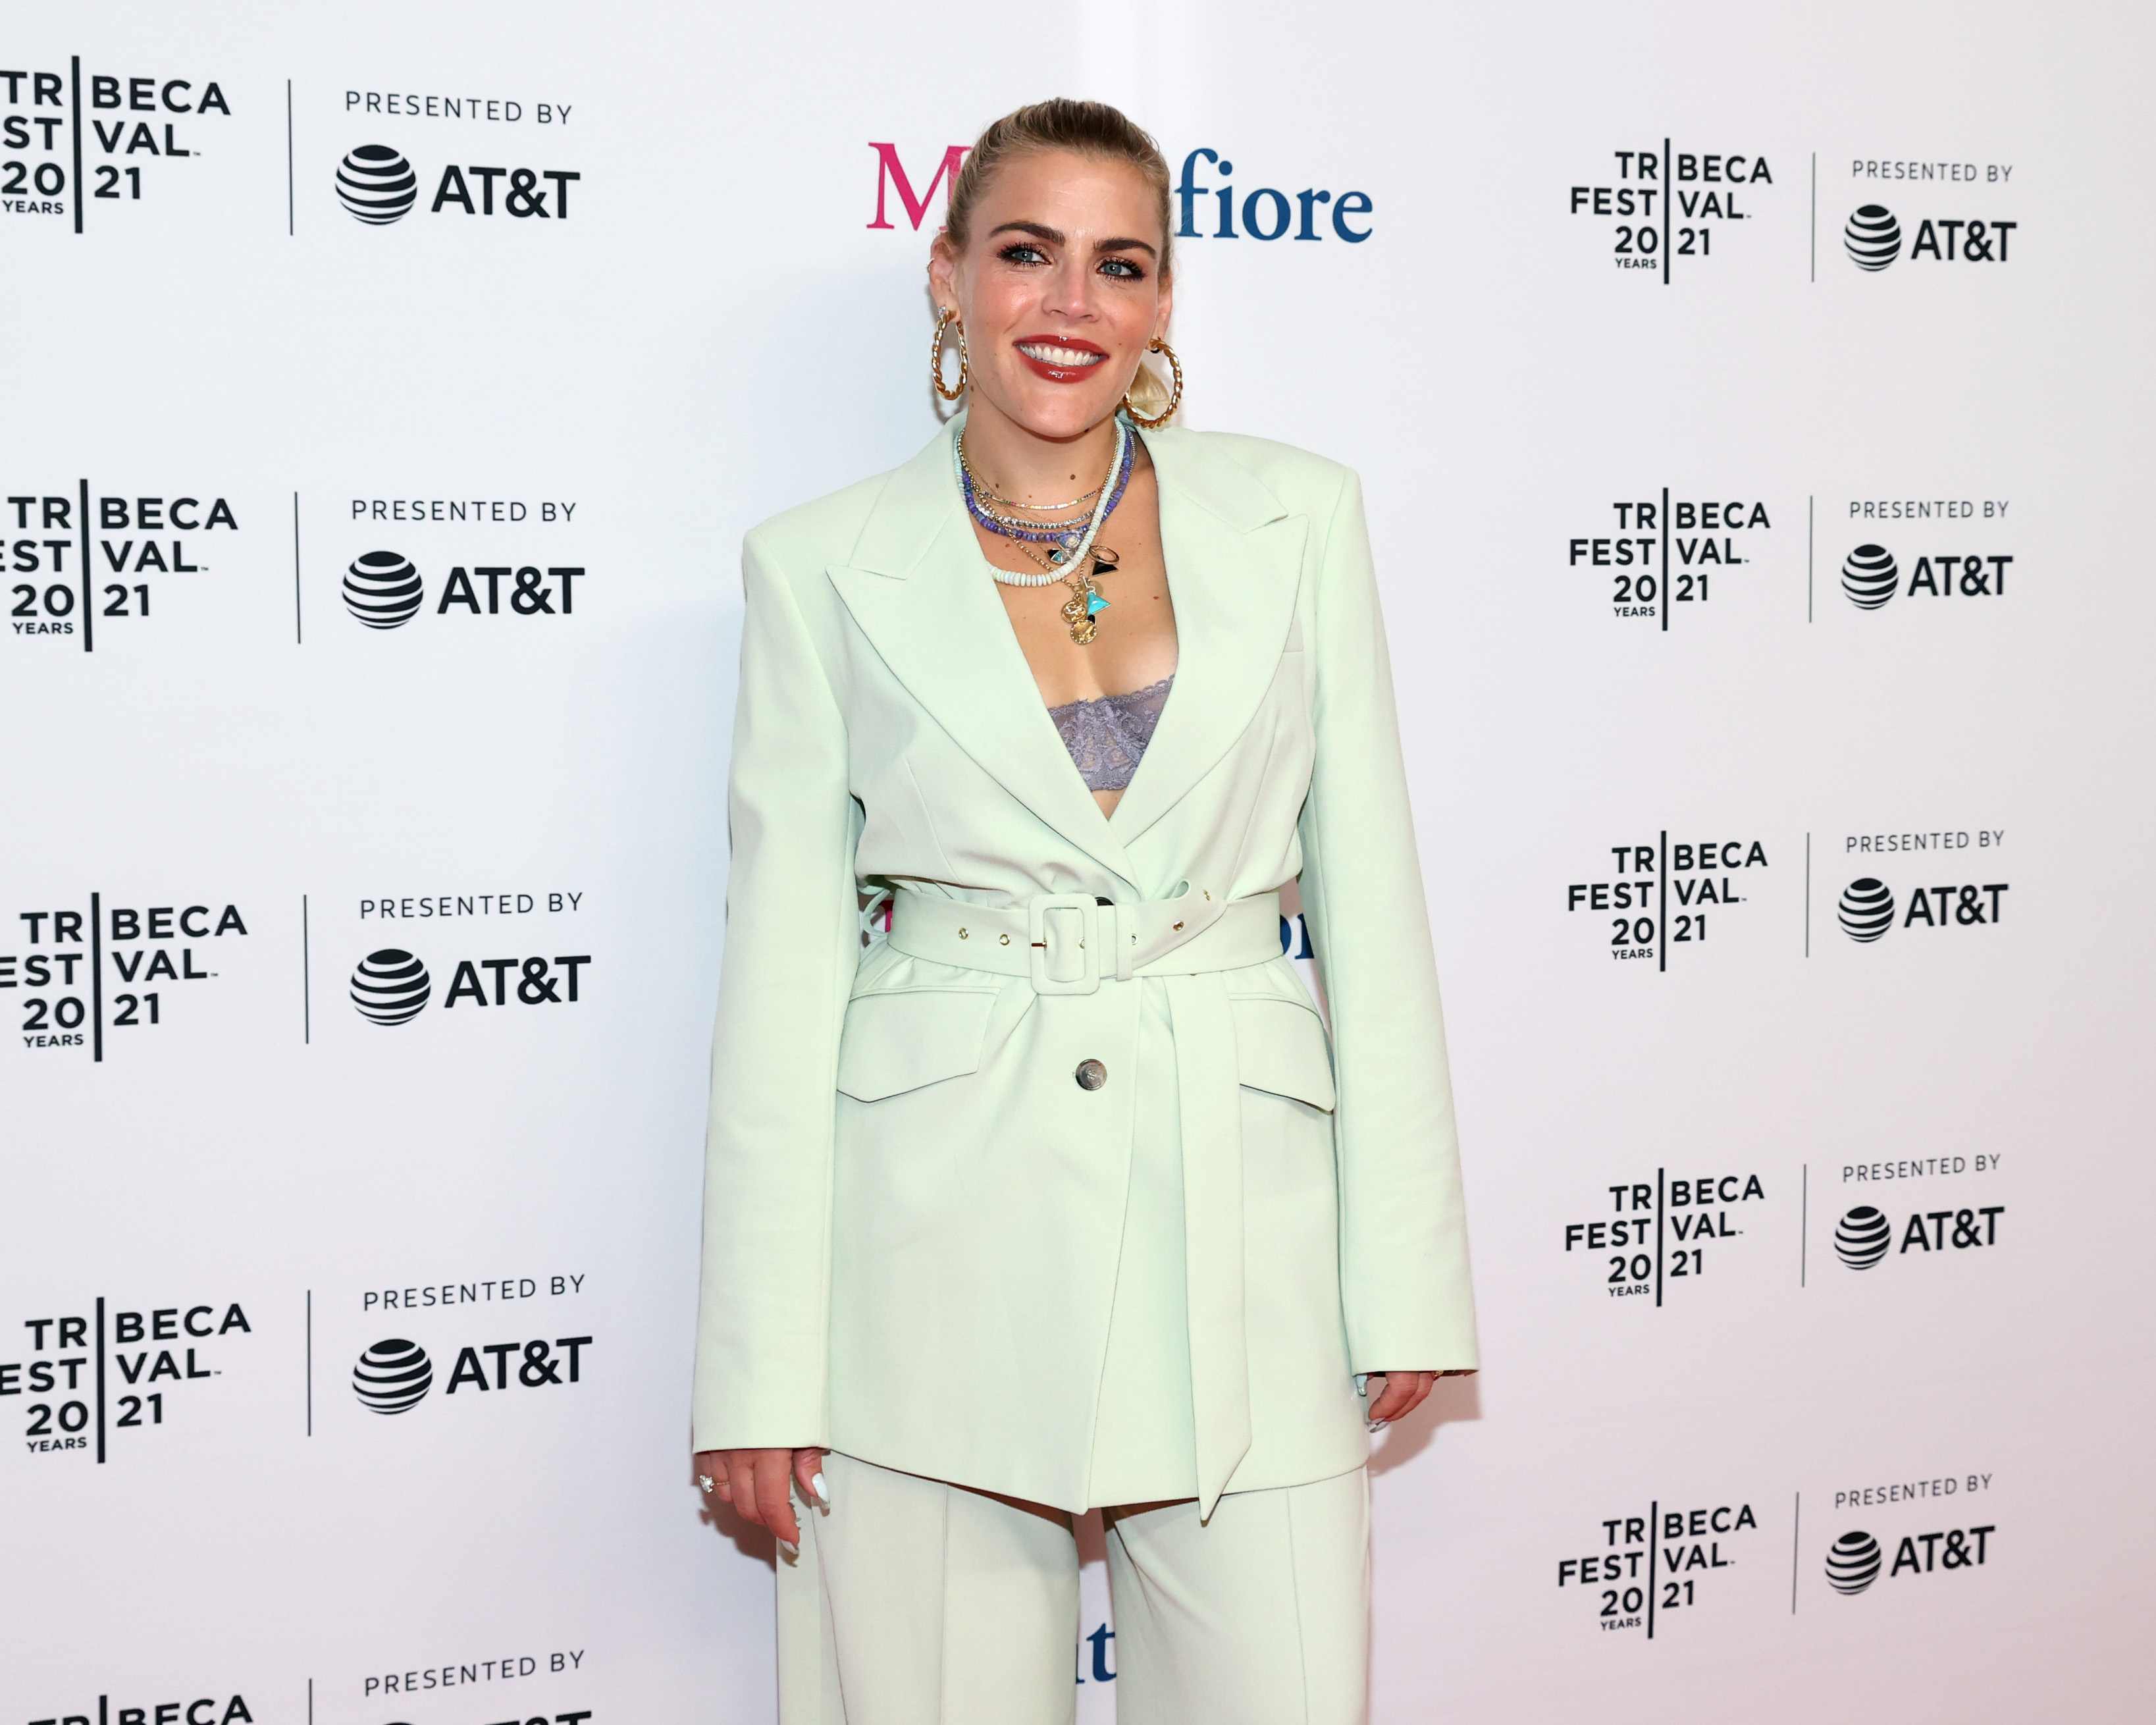 Busy Philipps wears a cream colored suit.